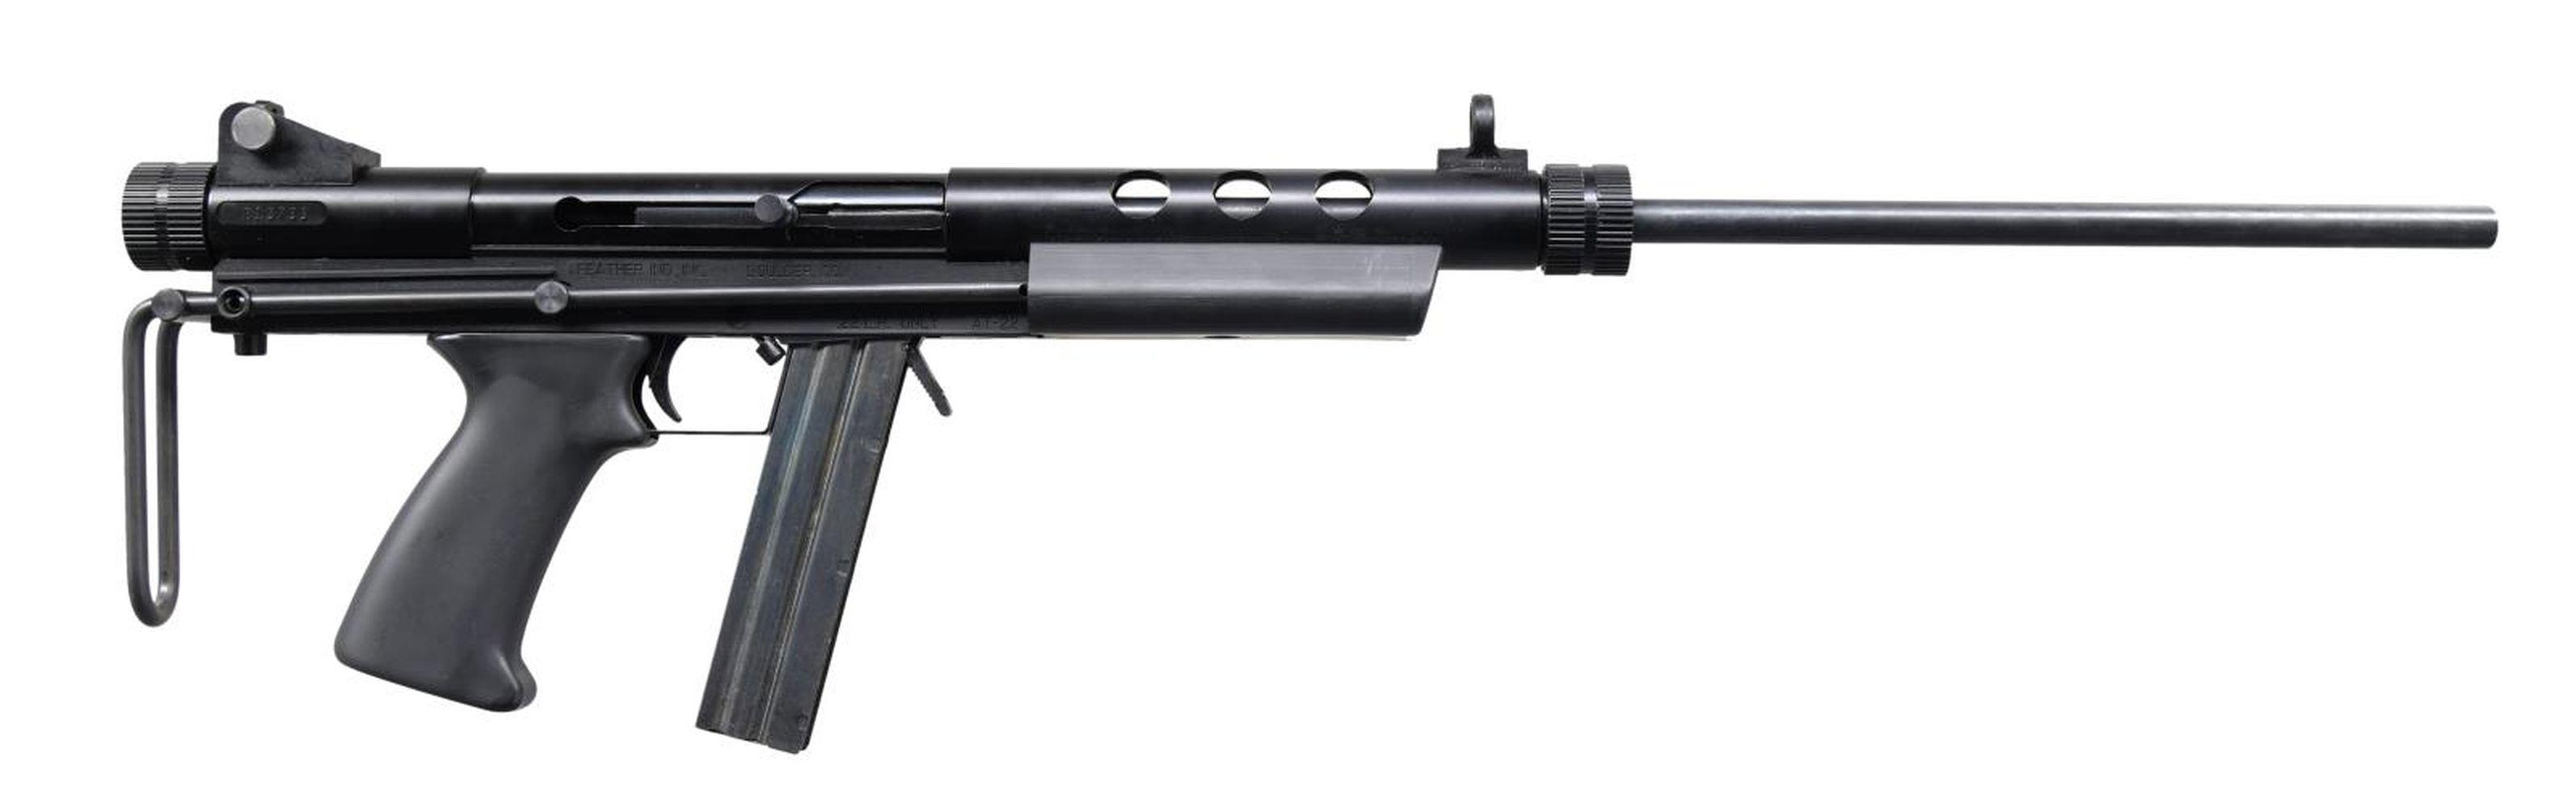 FEATHER INDUSTRIES AT-22 SEMI-AUTOMATIC RIFLE WITH